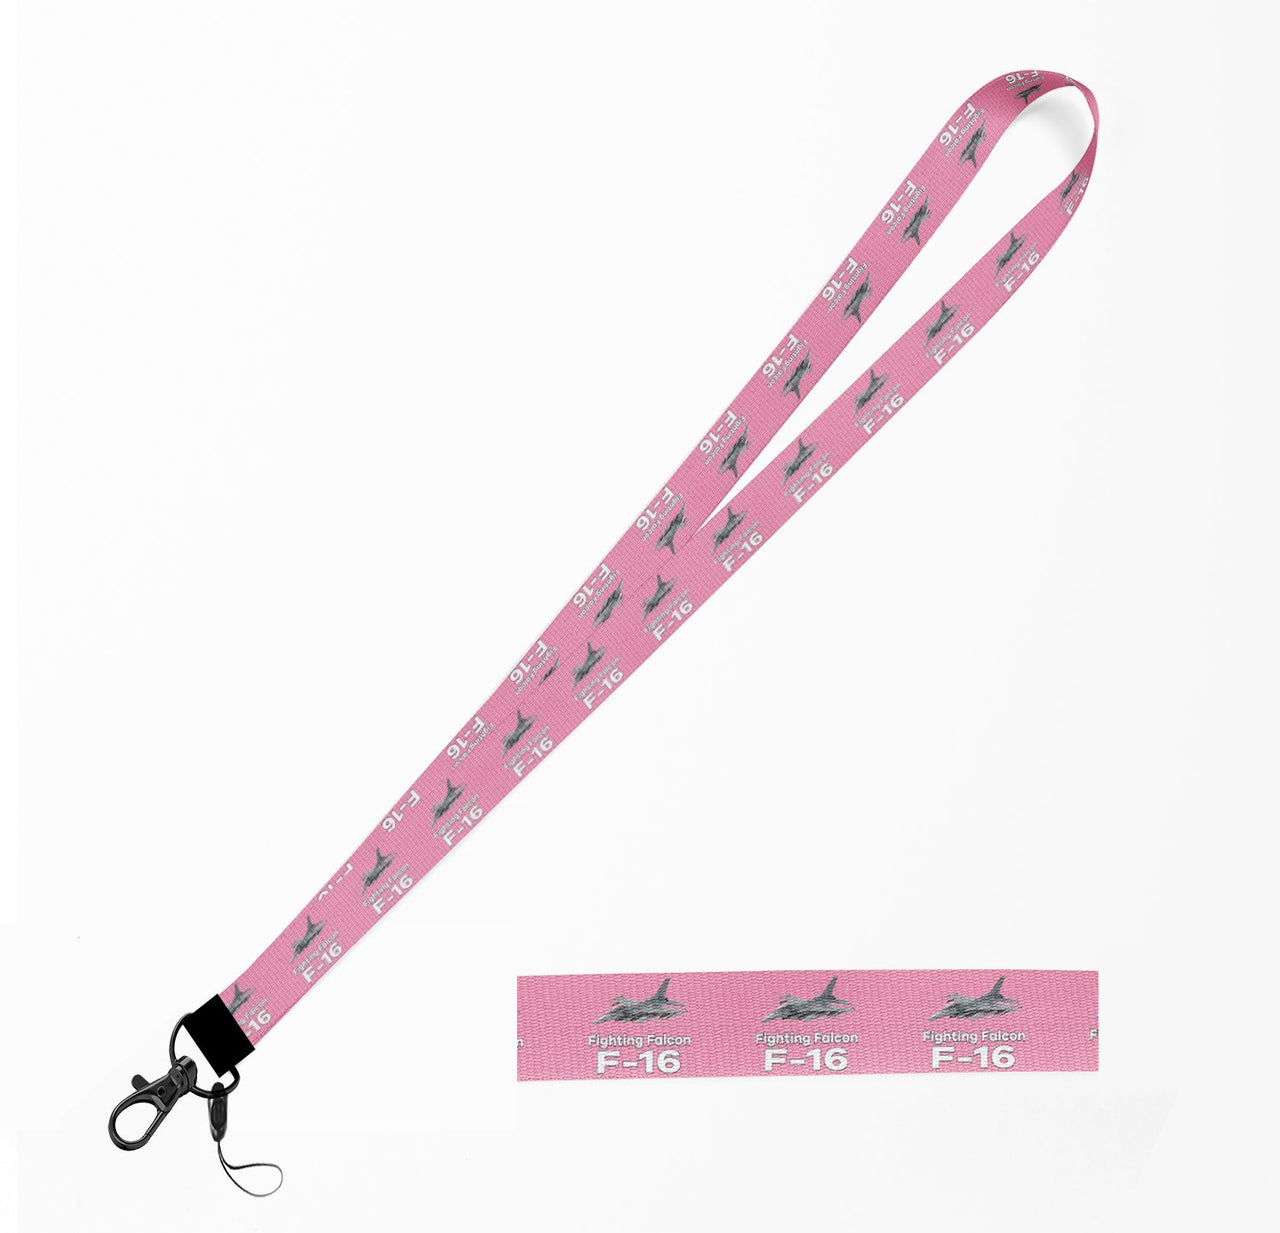 The Fighting Falcon F16 Designed Lanyard & ID Holders